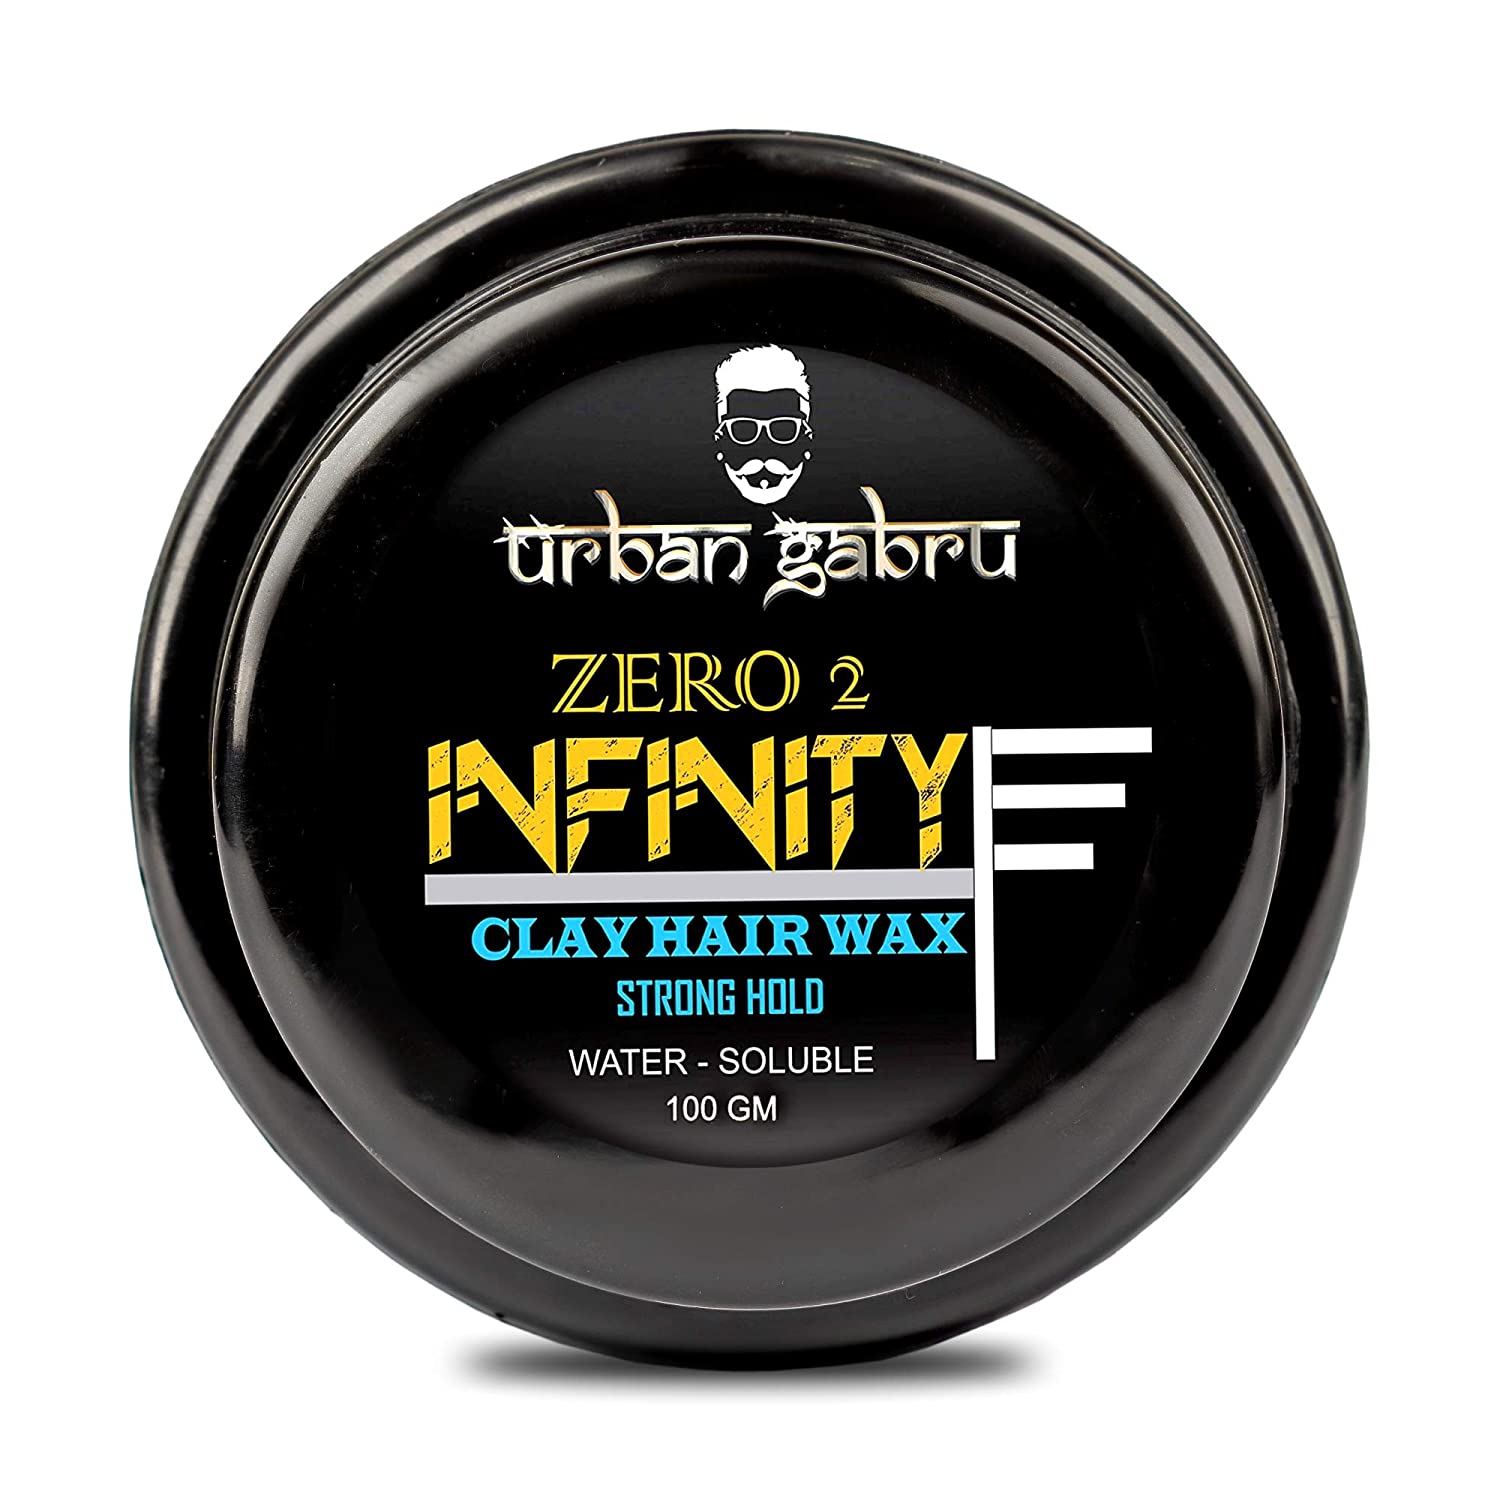 Top 15 Hair Wax for Men for That Added Edge in Hair Styling | PINKVILLA